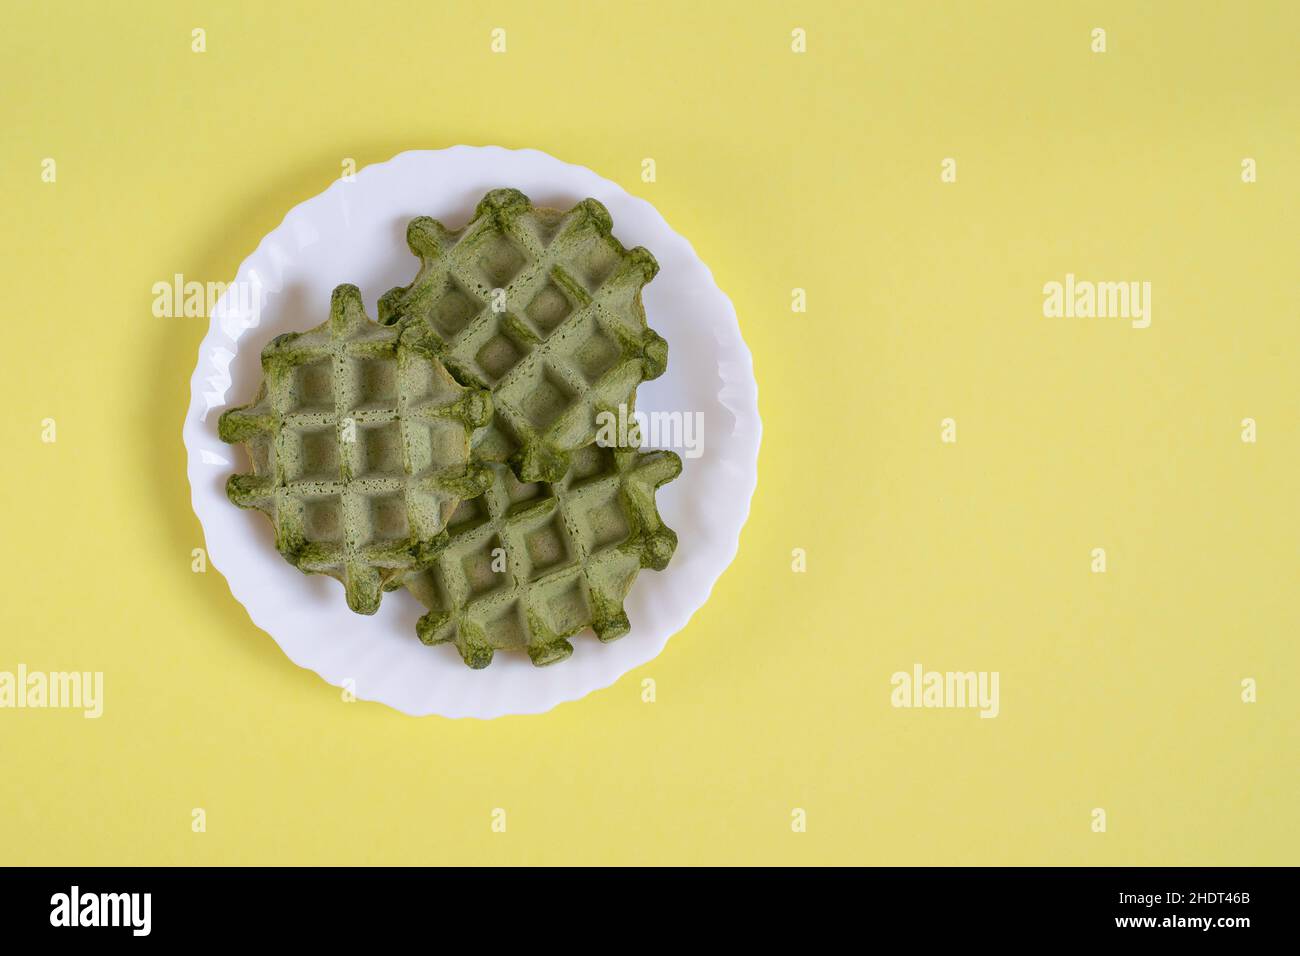 Three vegan green waffles on a plate on a yellow background Stock Photo